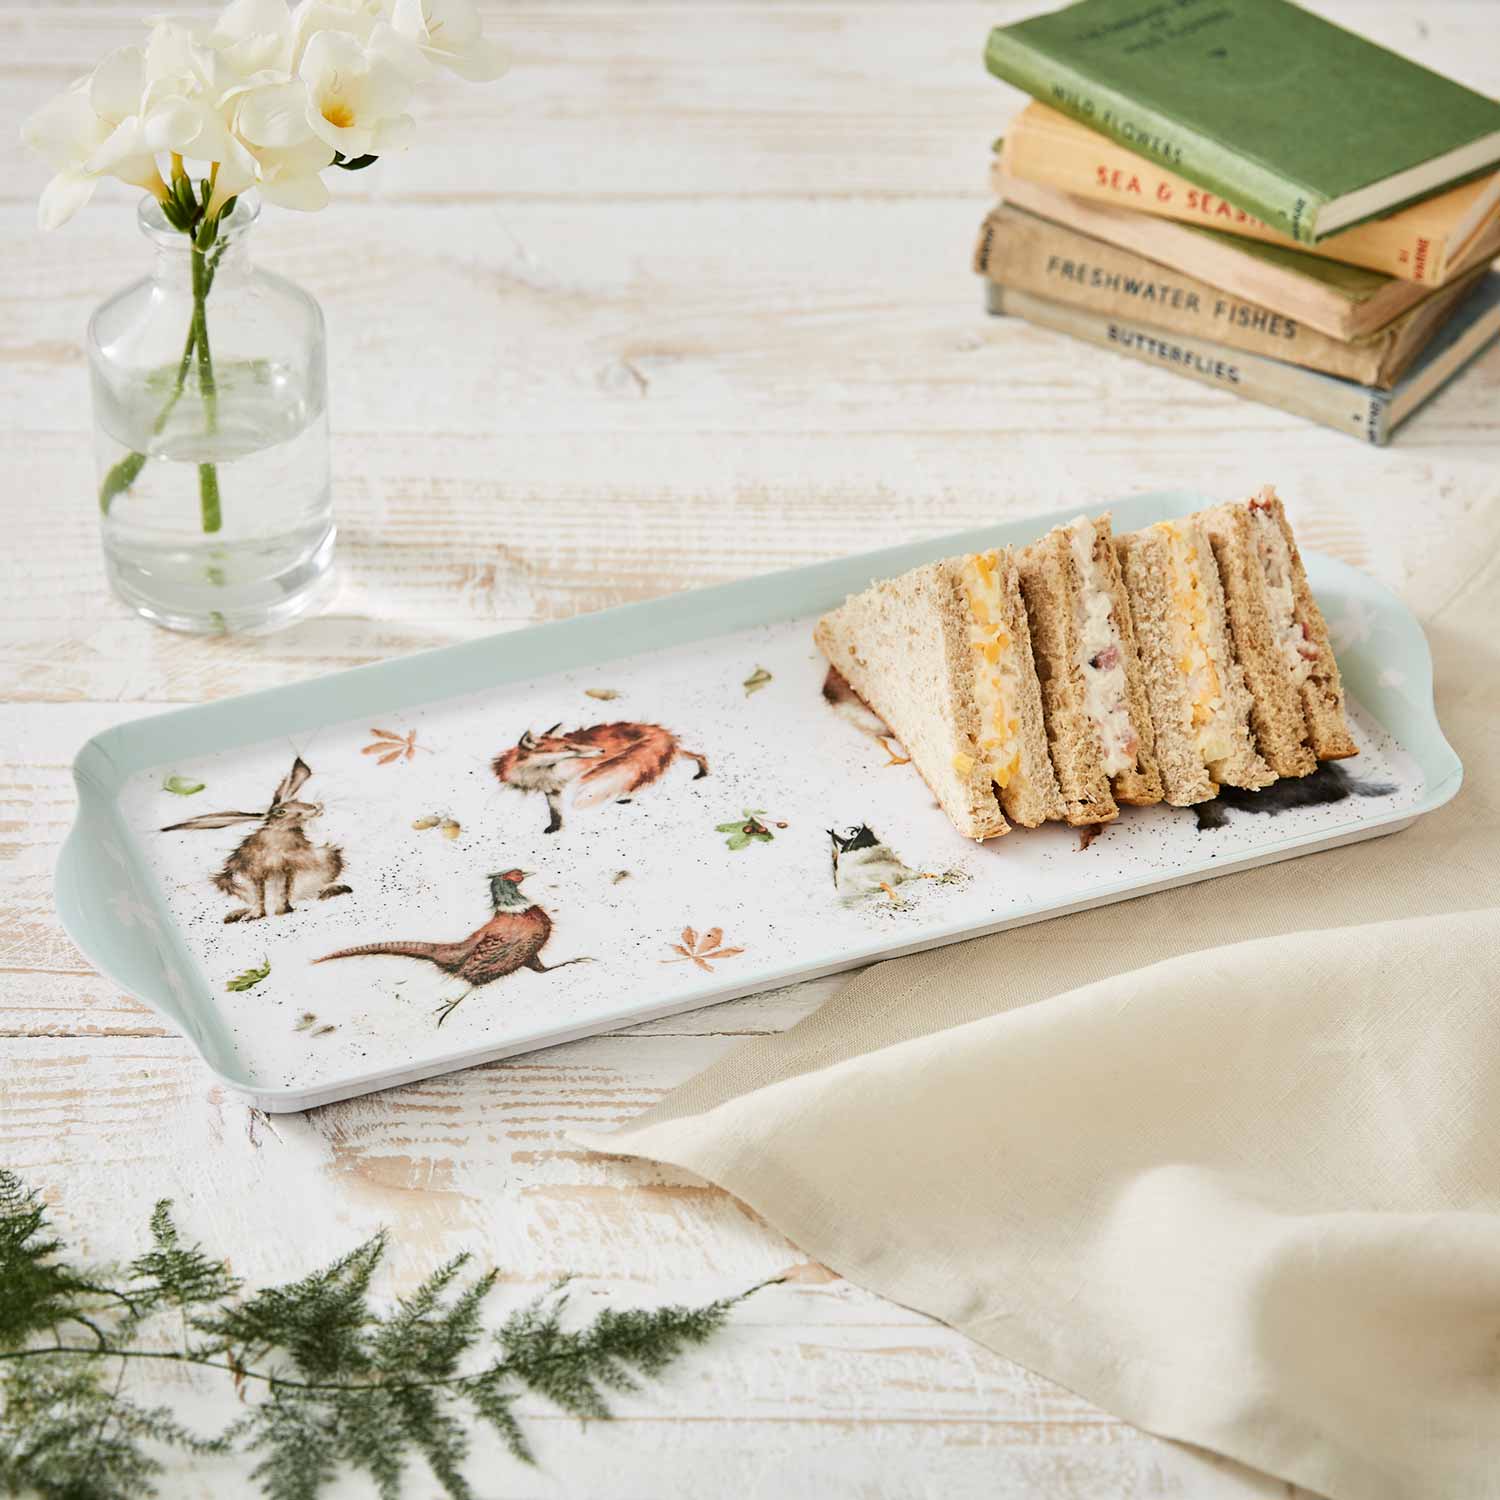 Wrendale Designs Sandwich Tray image number null